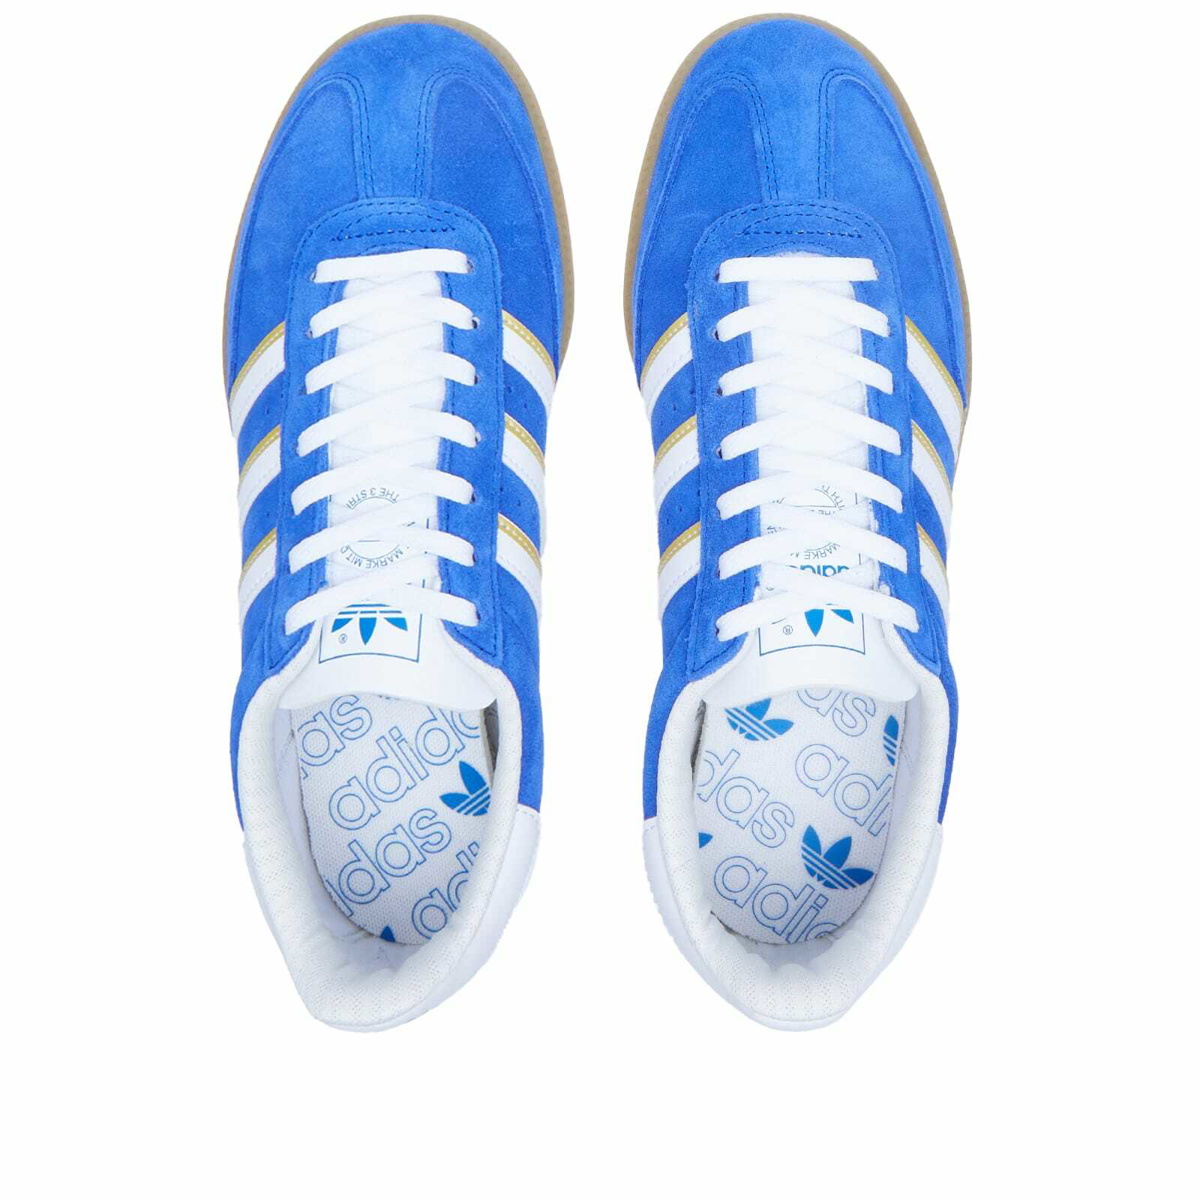 Sneakers Adidas Lucid Blue/White Semi adidas 2 Hand in